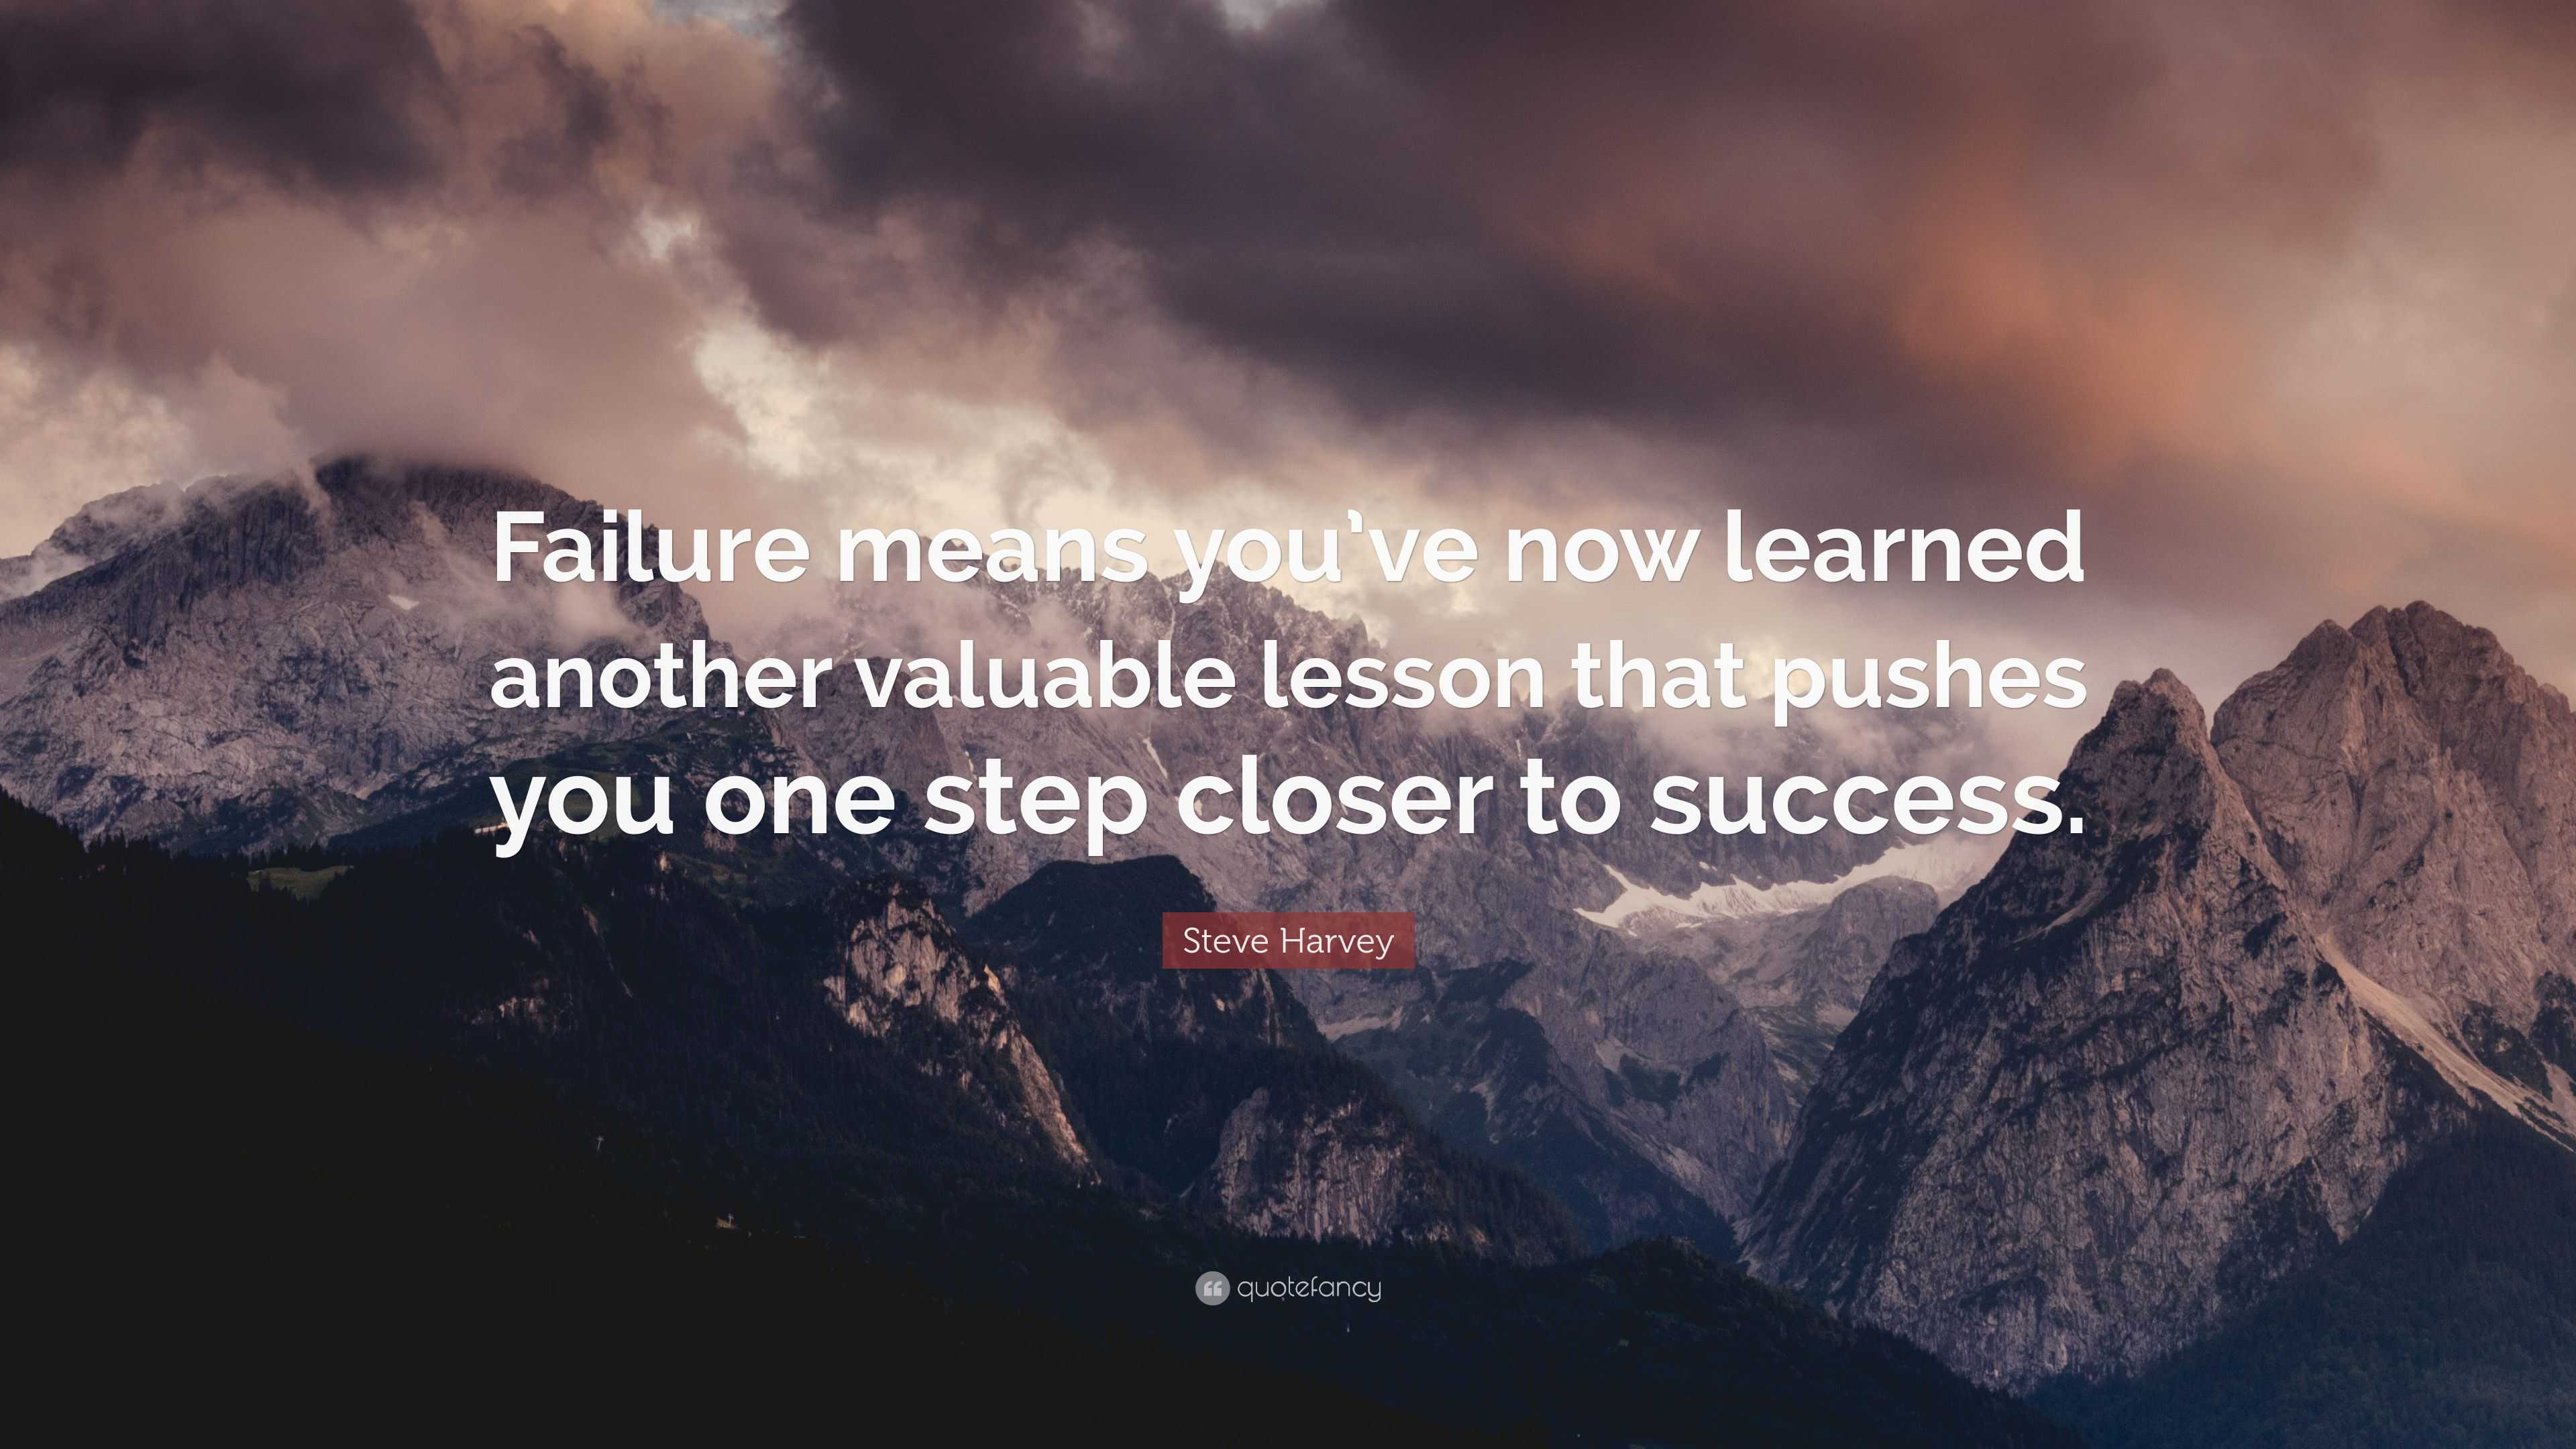 6 lessons you learn from failure - Airswift